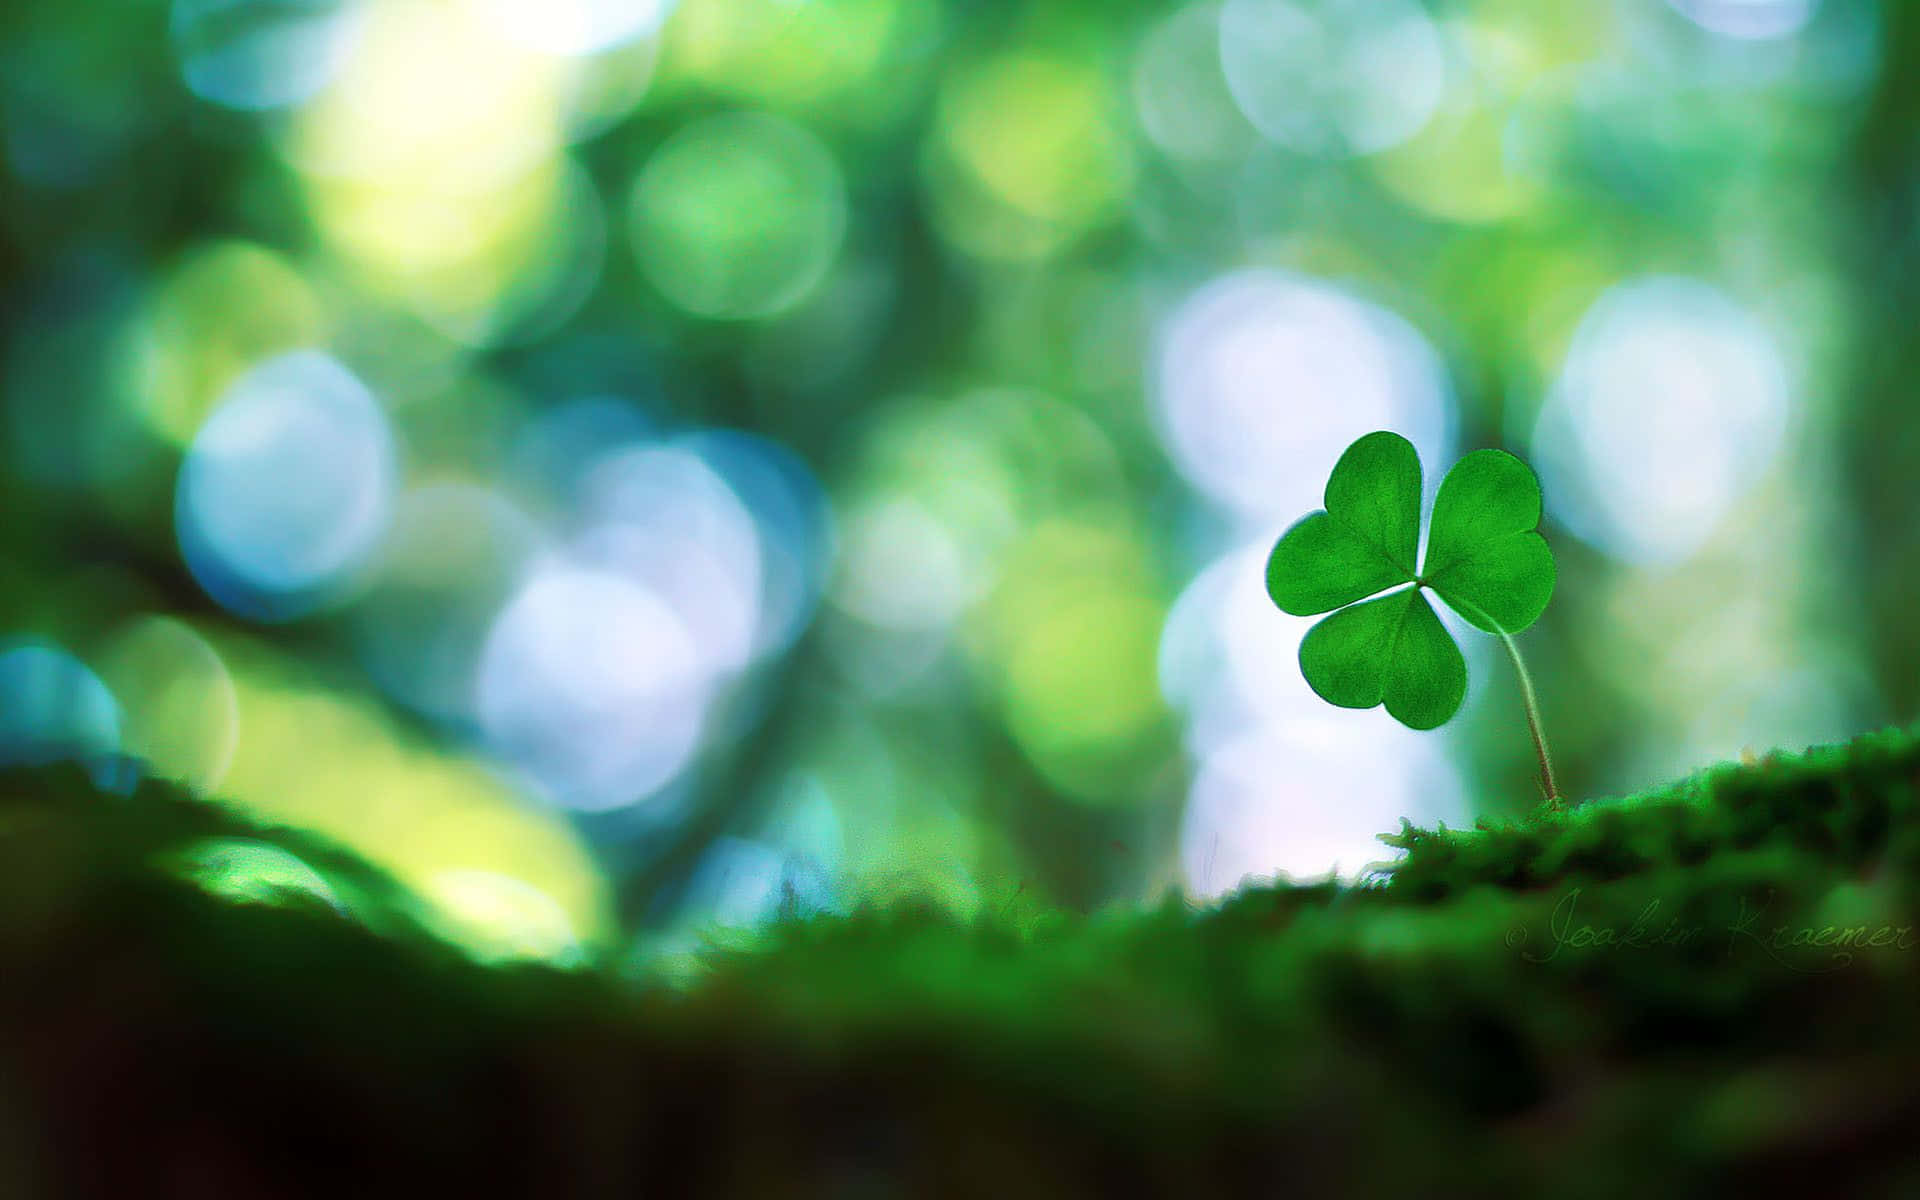 "Get That Lucky Feeling – Clovers Represent Good Fortune"